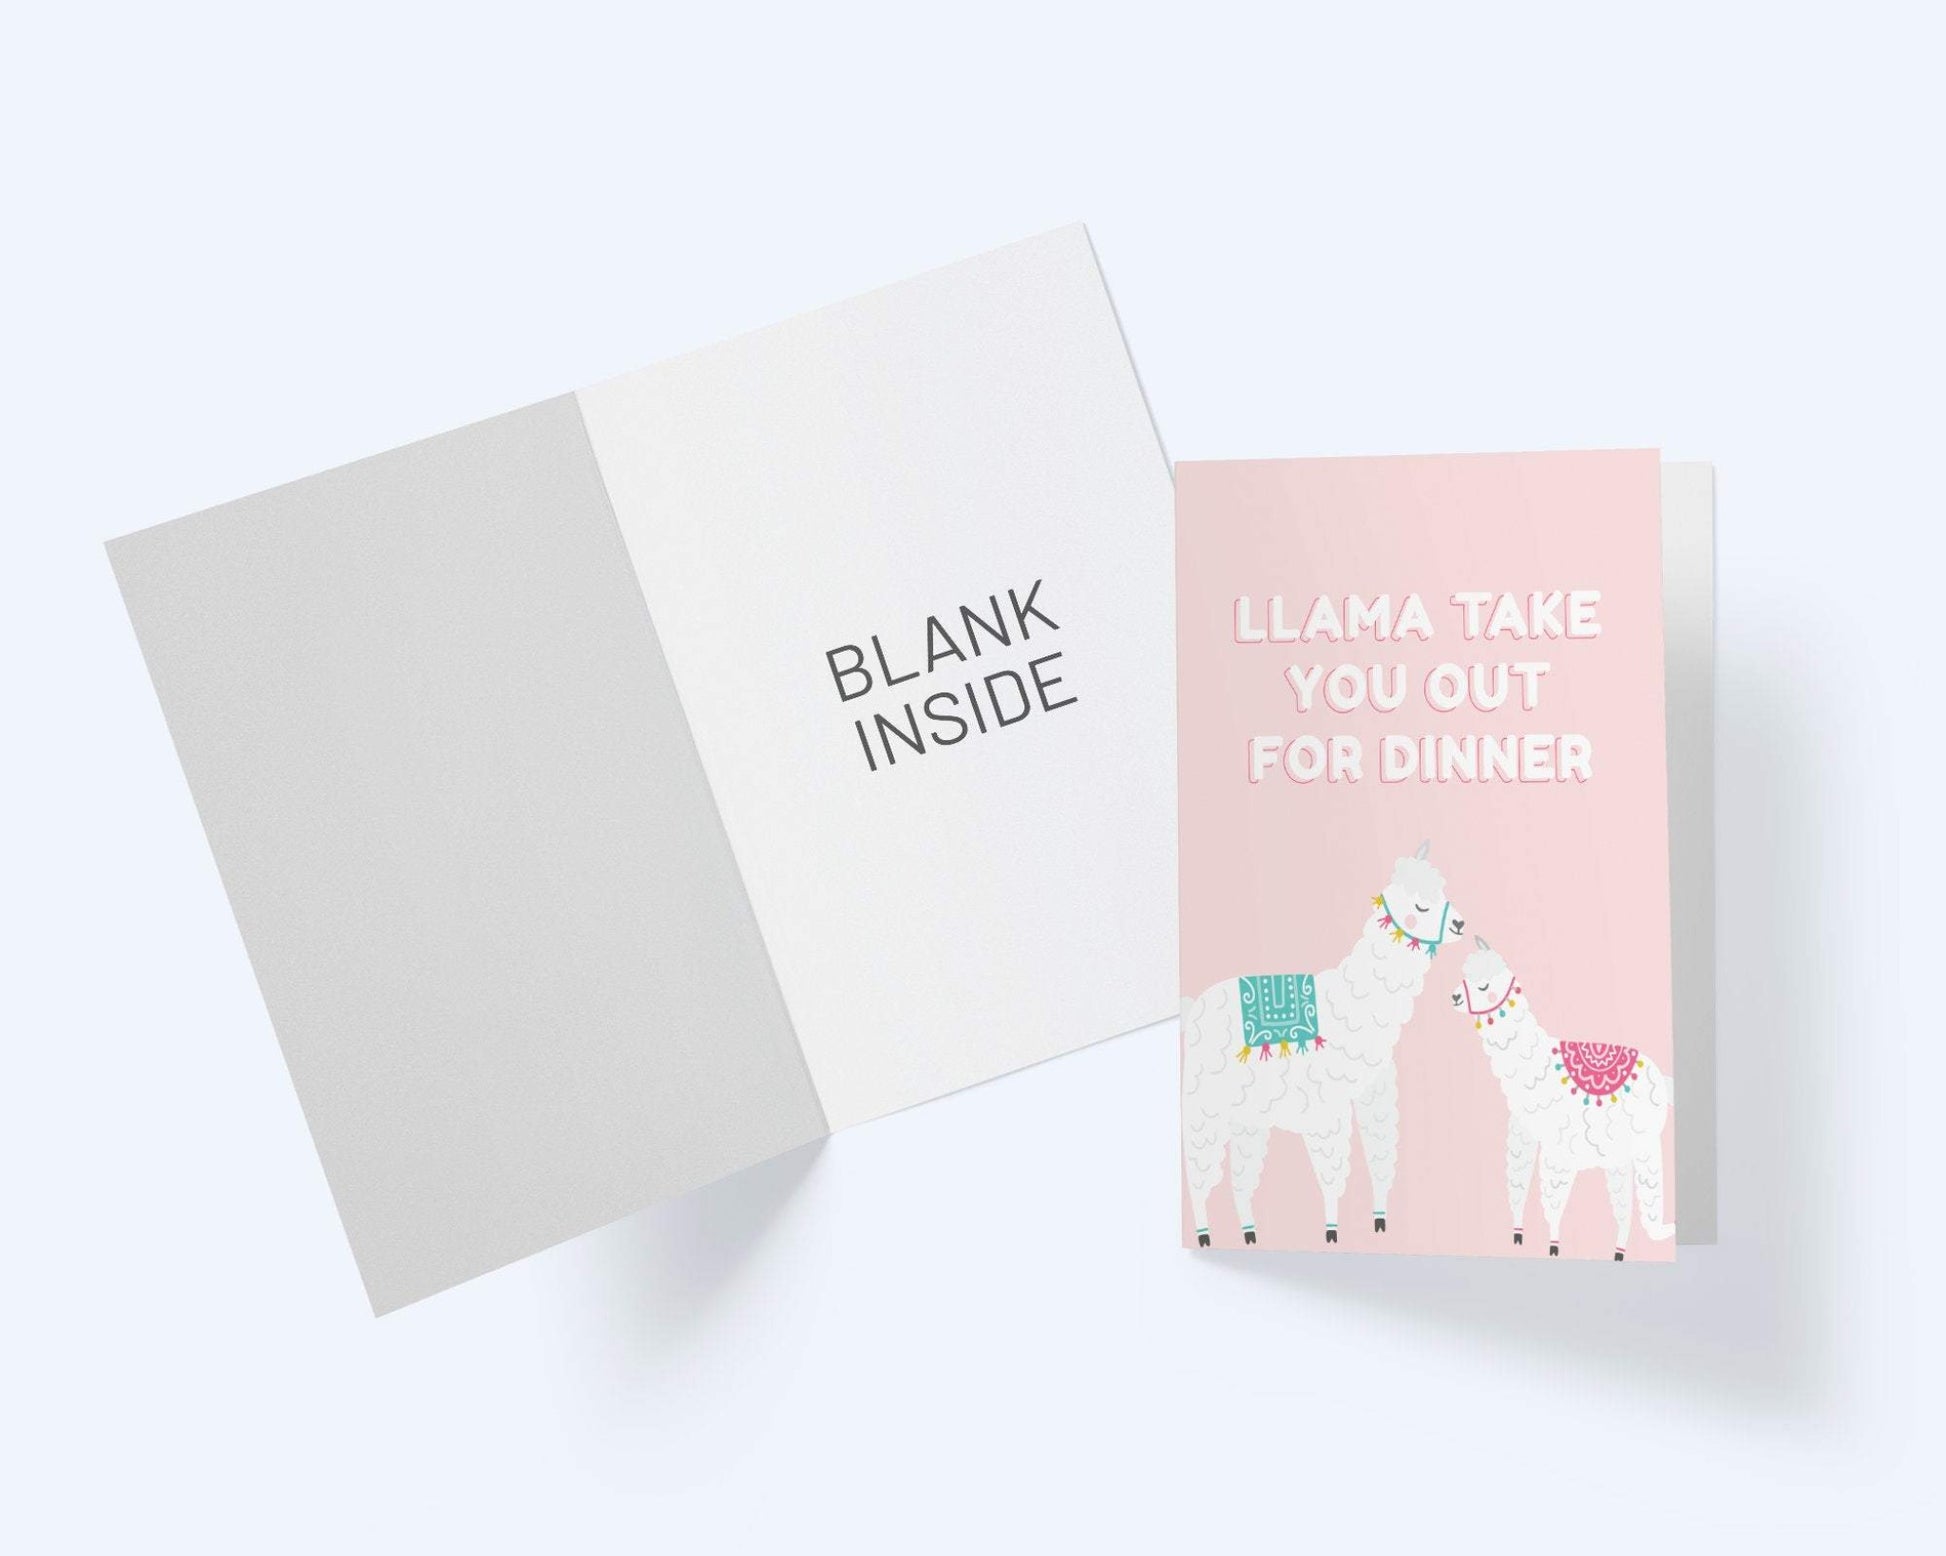 Llama Take You Out To Dinner - Love And Friendship - Anniversary  - Thinking Of You Card.